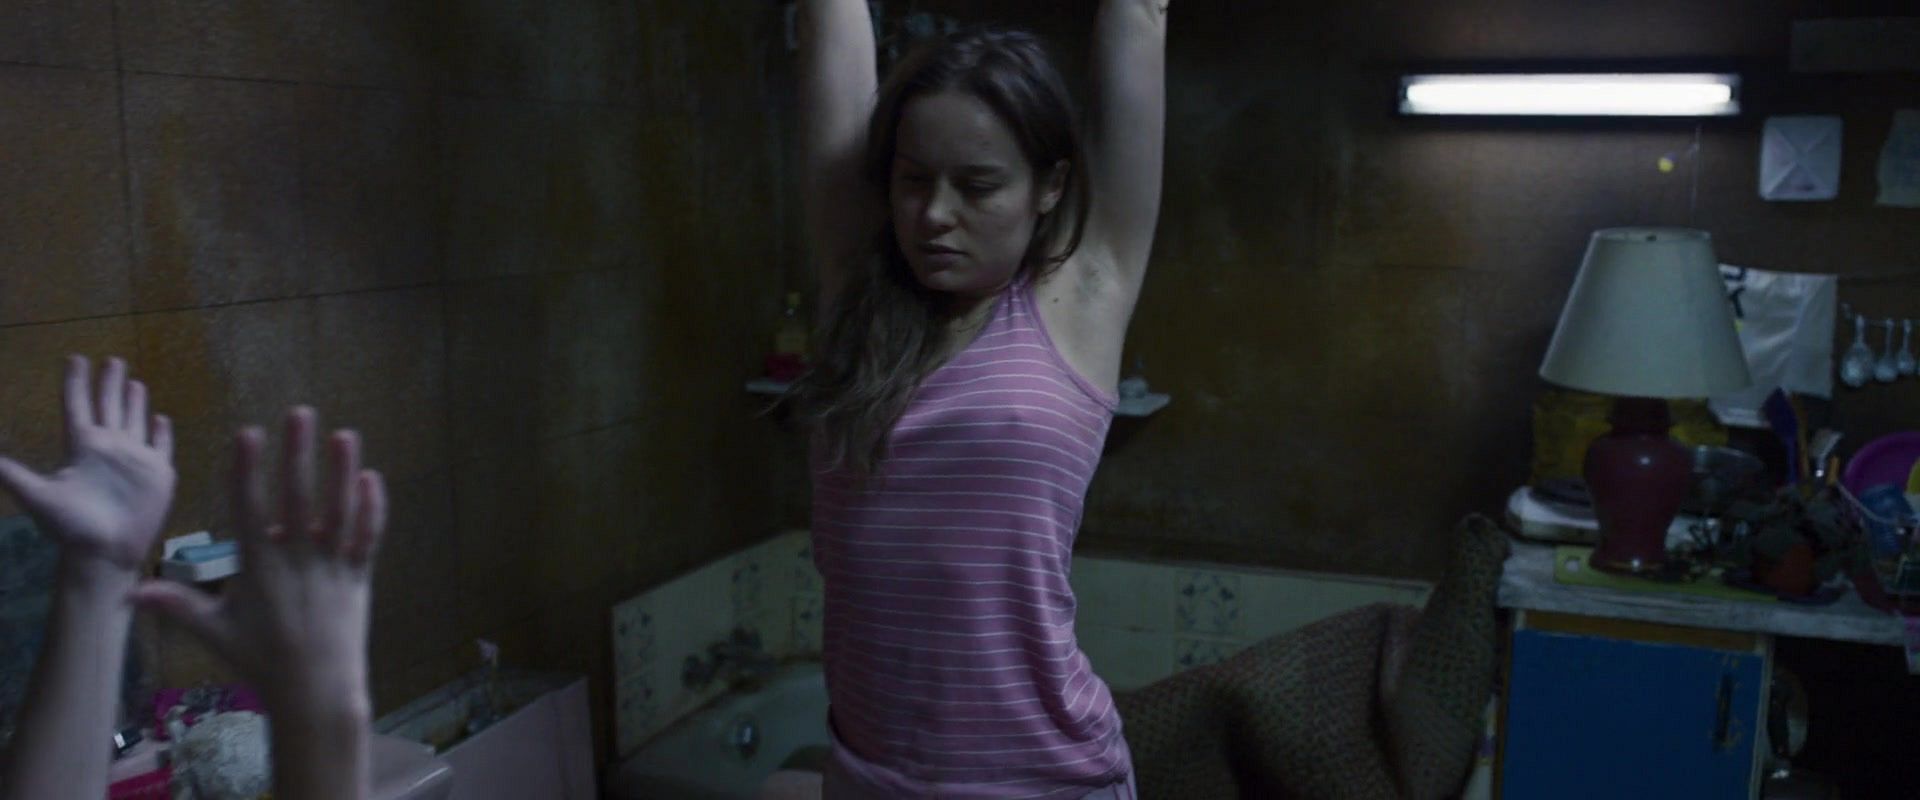 Nude brie been larson ever FULL: Brie